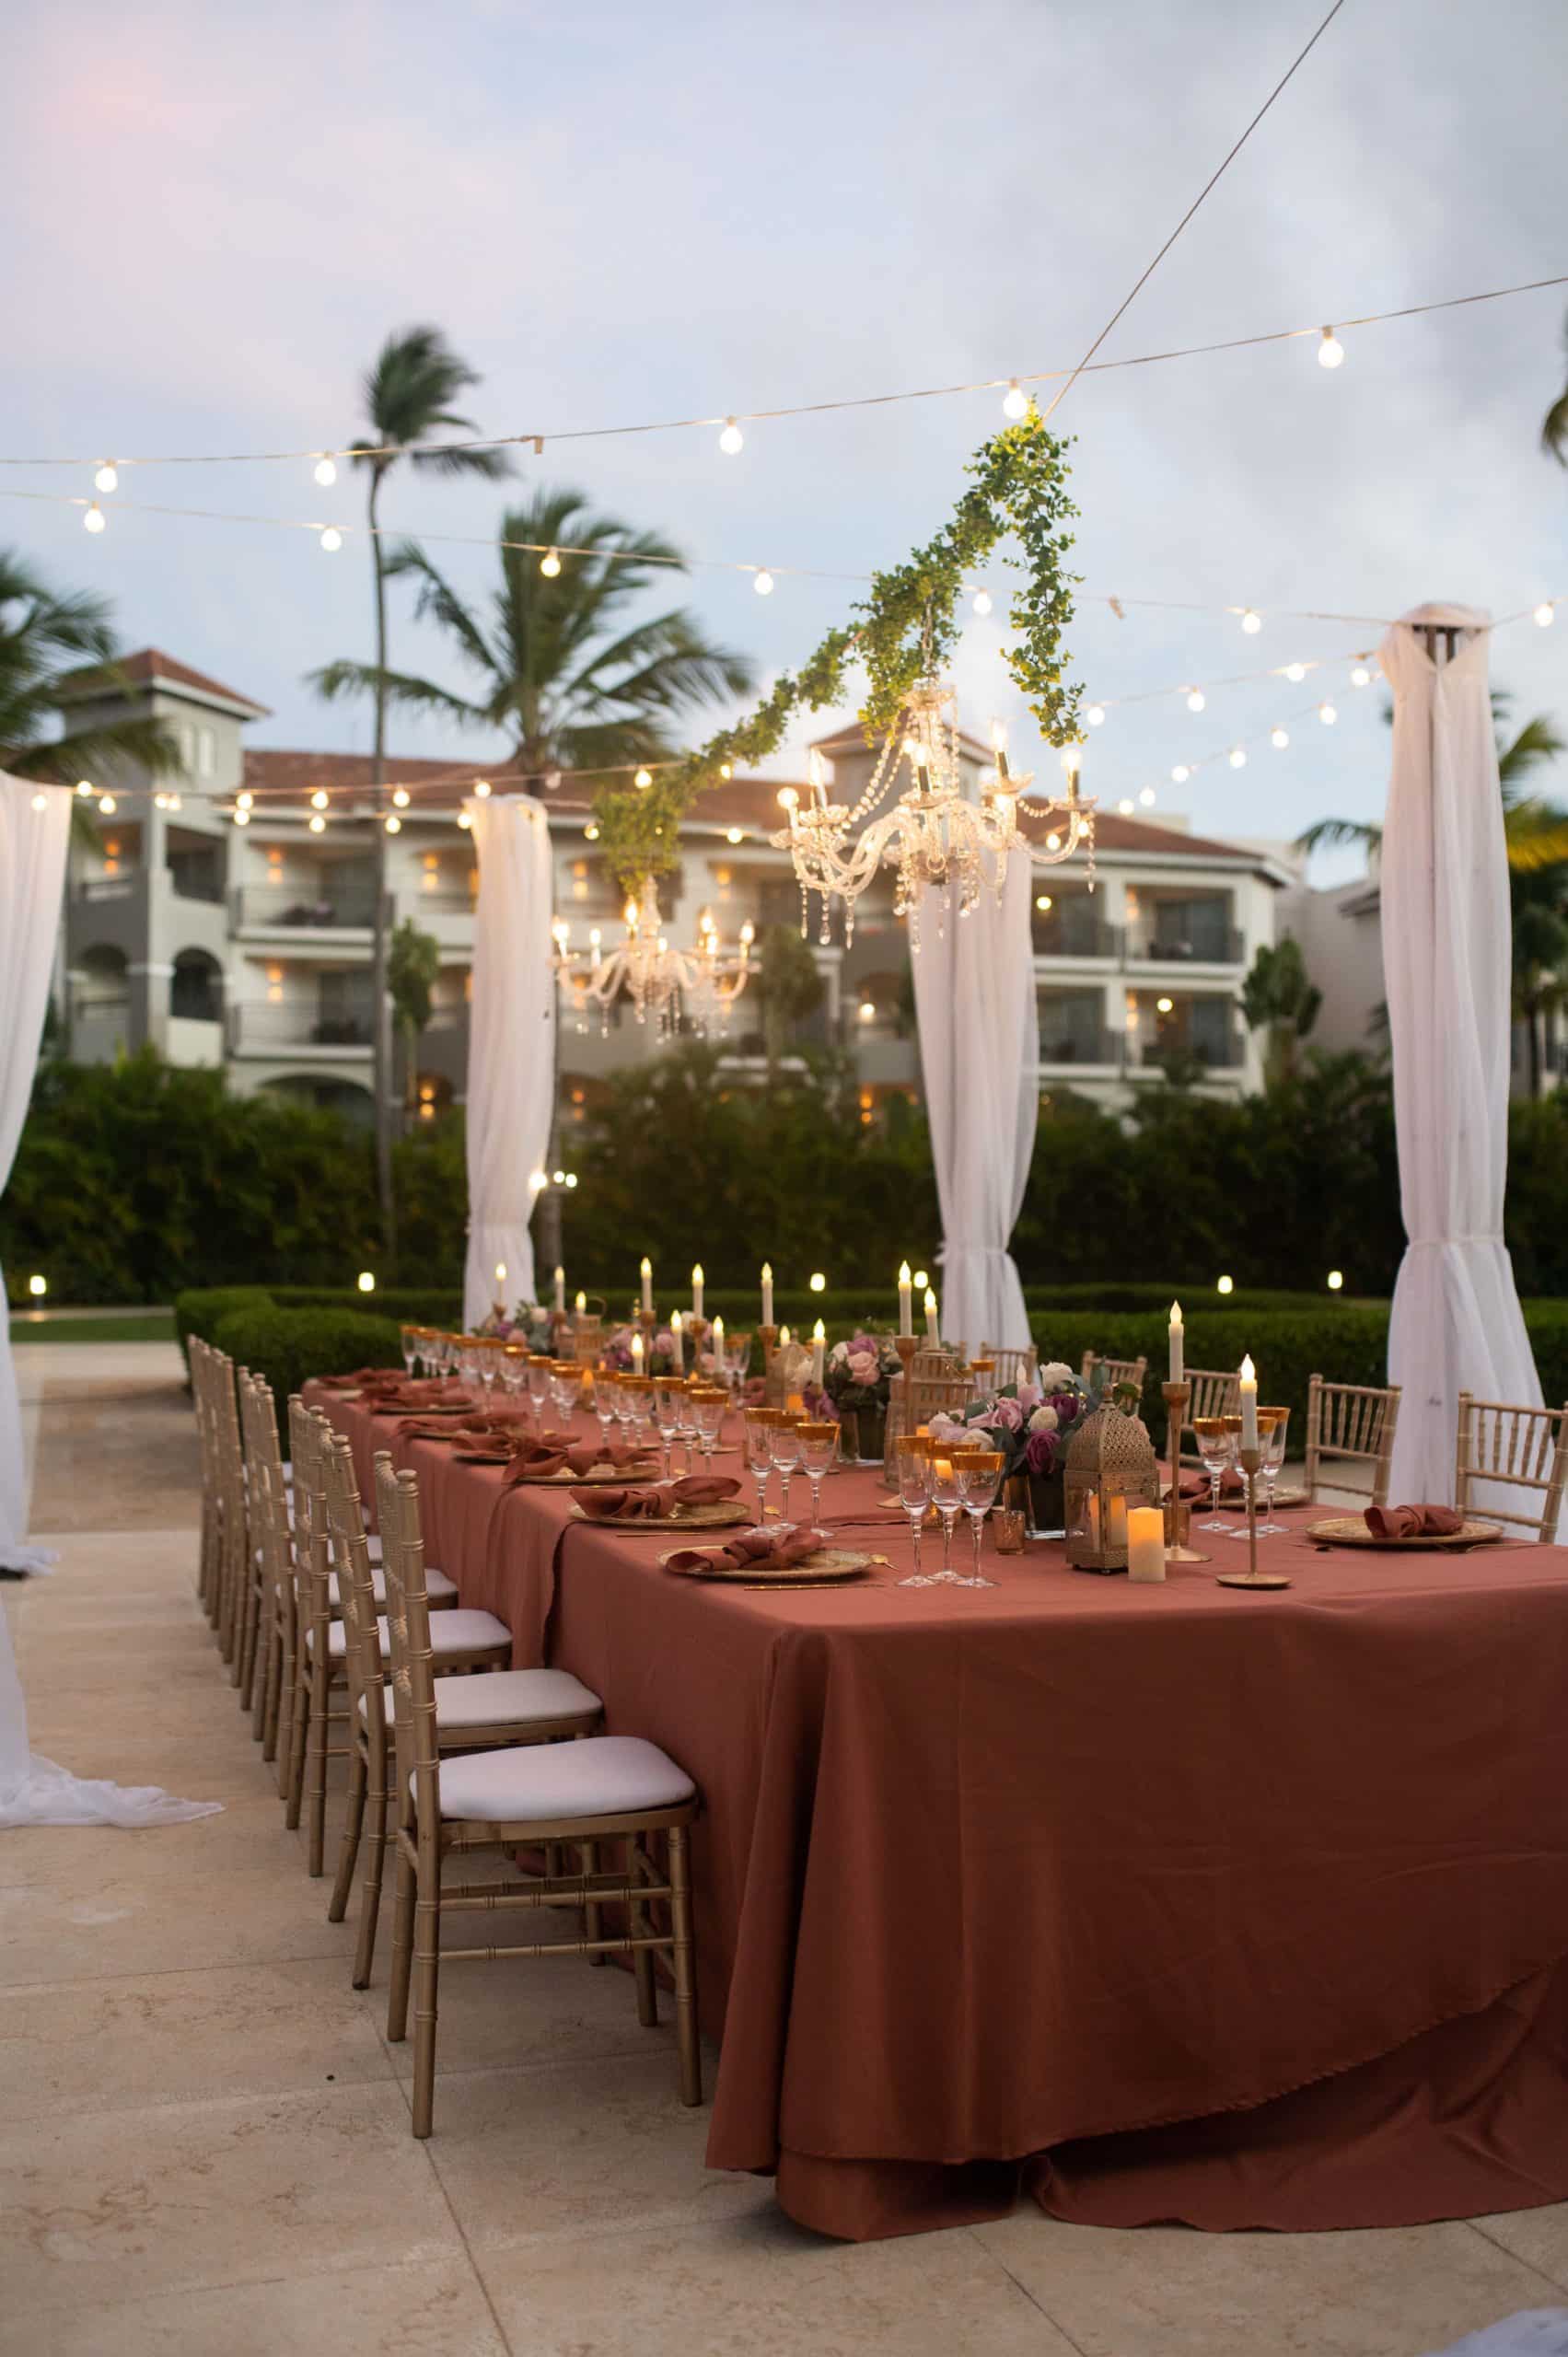 Destination Wedding Reception layout with terra cotta tablecloth and chandeliers